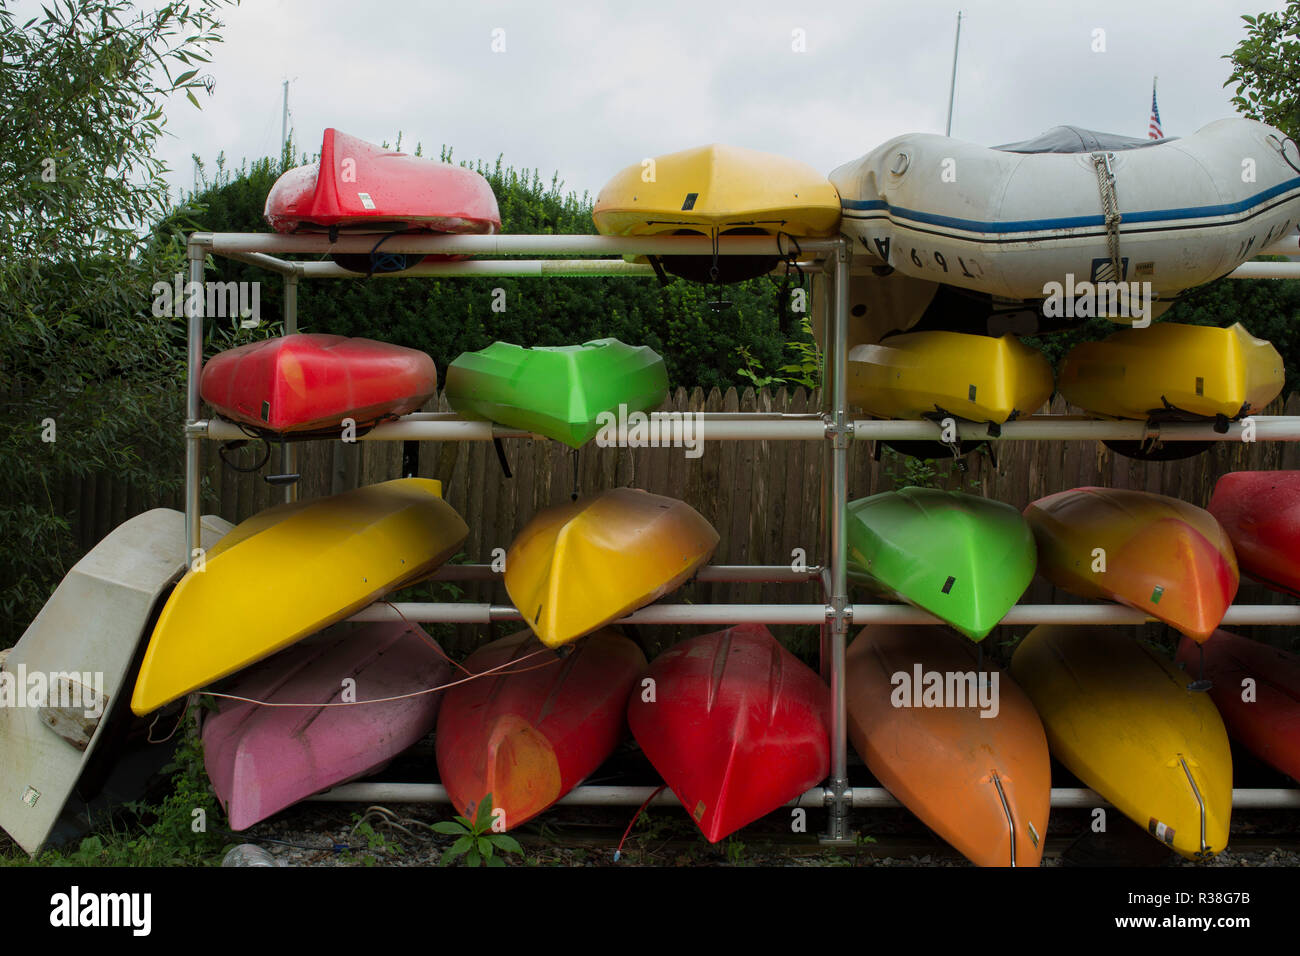 Kayaks on metal rack, wood fence and bushes in background. Essex is a pretty village, white collar executives with beautiful homes. Connecticut River. Stock Photo